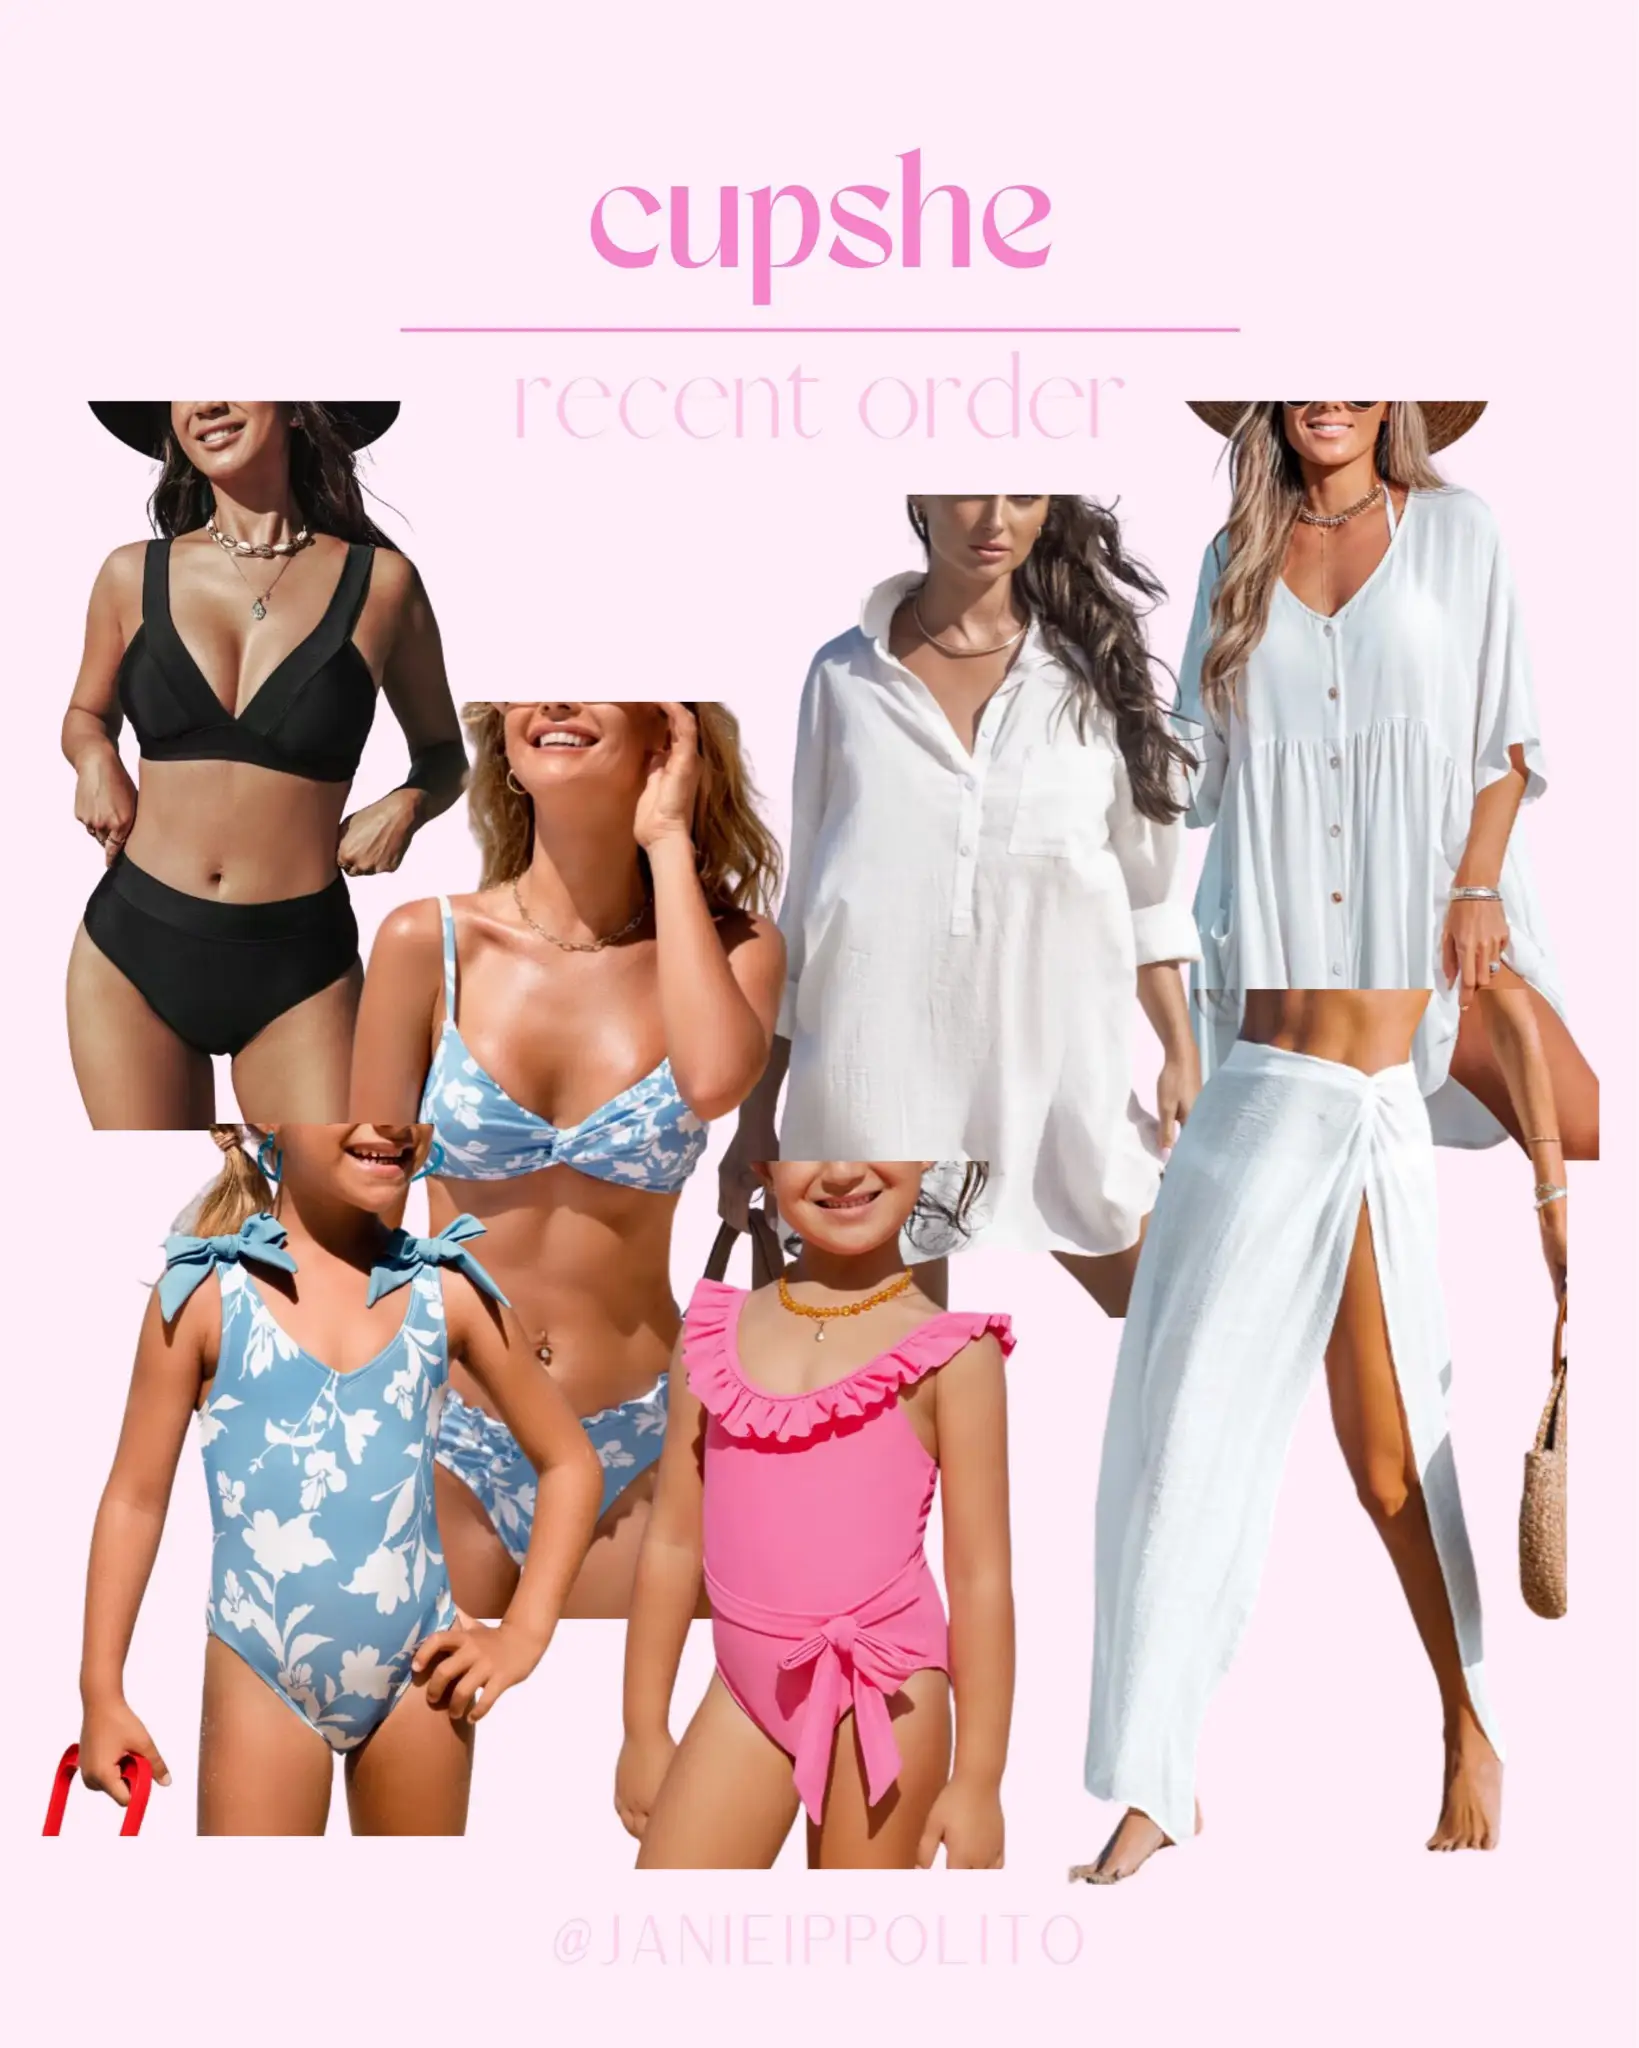 Obessed with this CupShe tummy control swimsuit. Literally felt like I, Cupshe